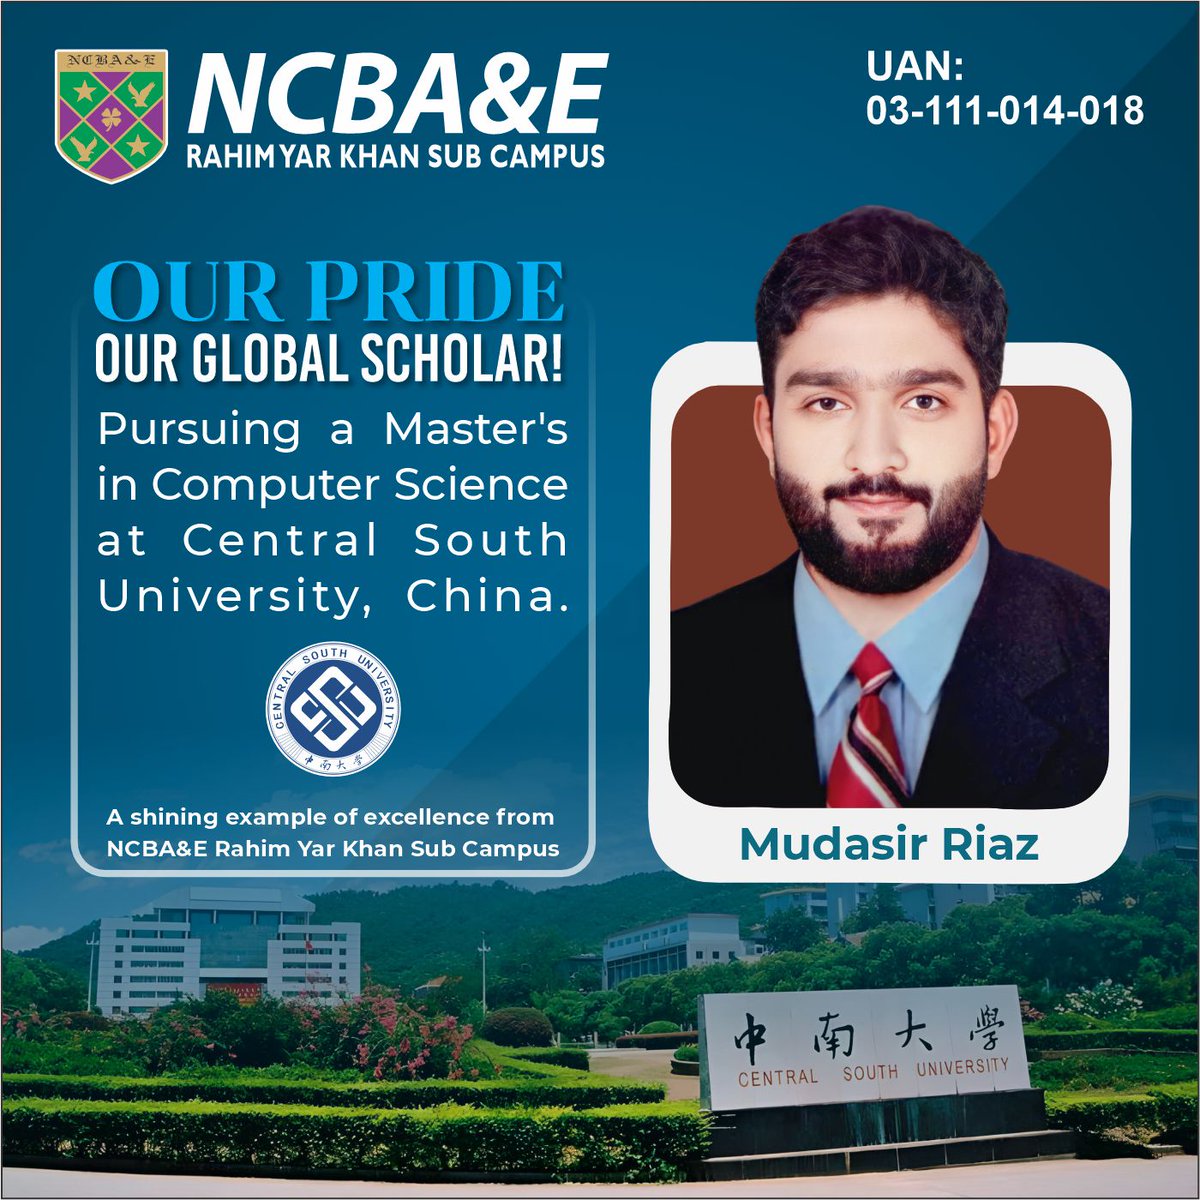 Congratulations to Mudasir Riaz, a brilliant student from NCBA&E Rahim Yar Khan Sub Campus, on receiving the Chinese Scholarship for his Master's in Computer Science at Central South University, China. We are proud of your achievements!
#NCBAEUniversity #Scholarship #ProudStudent